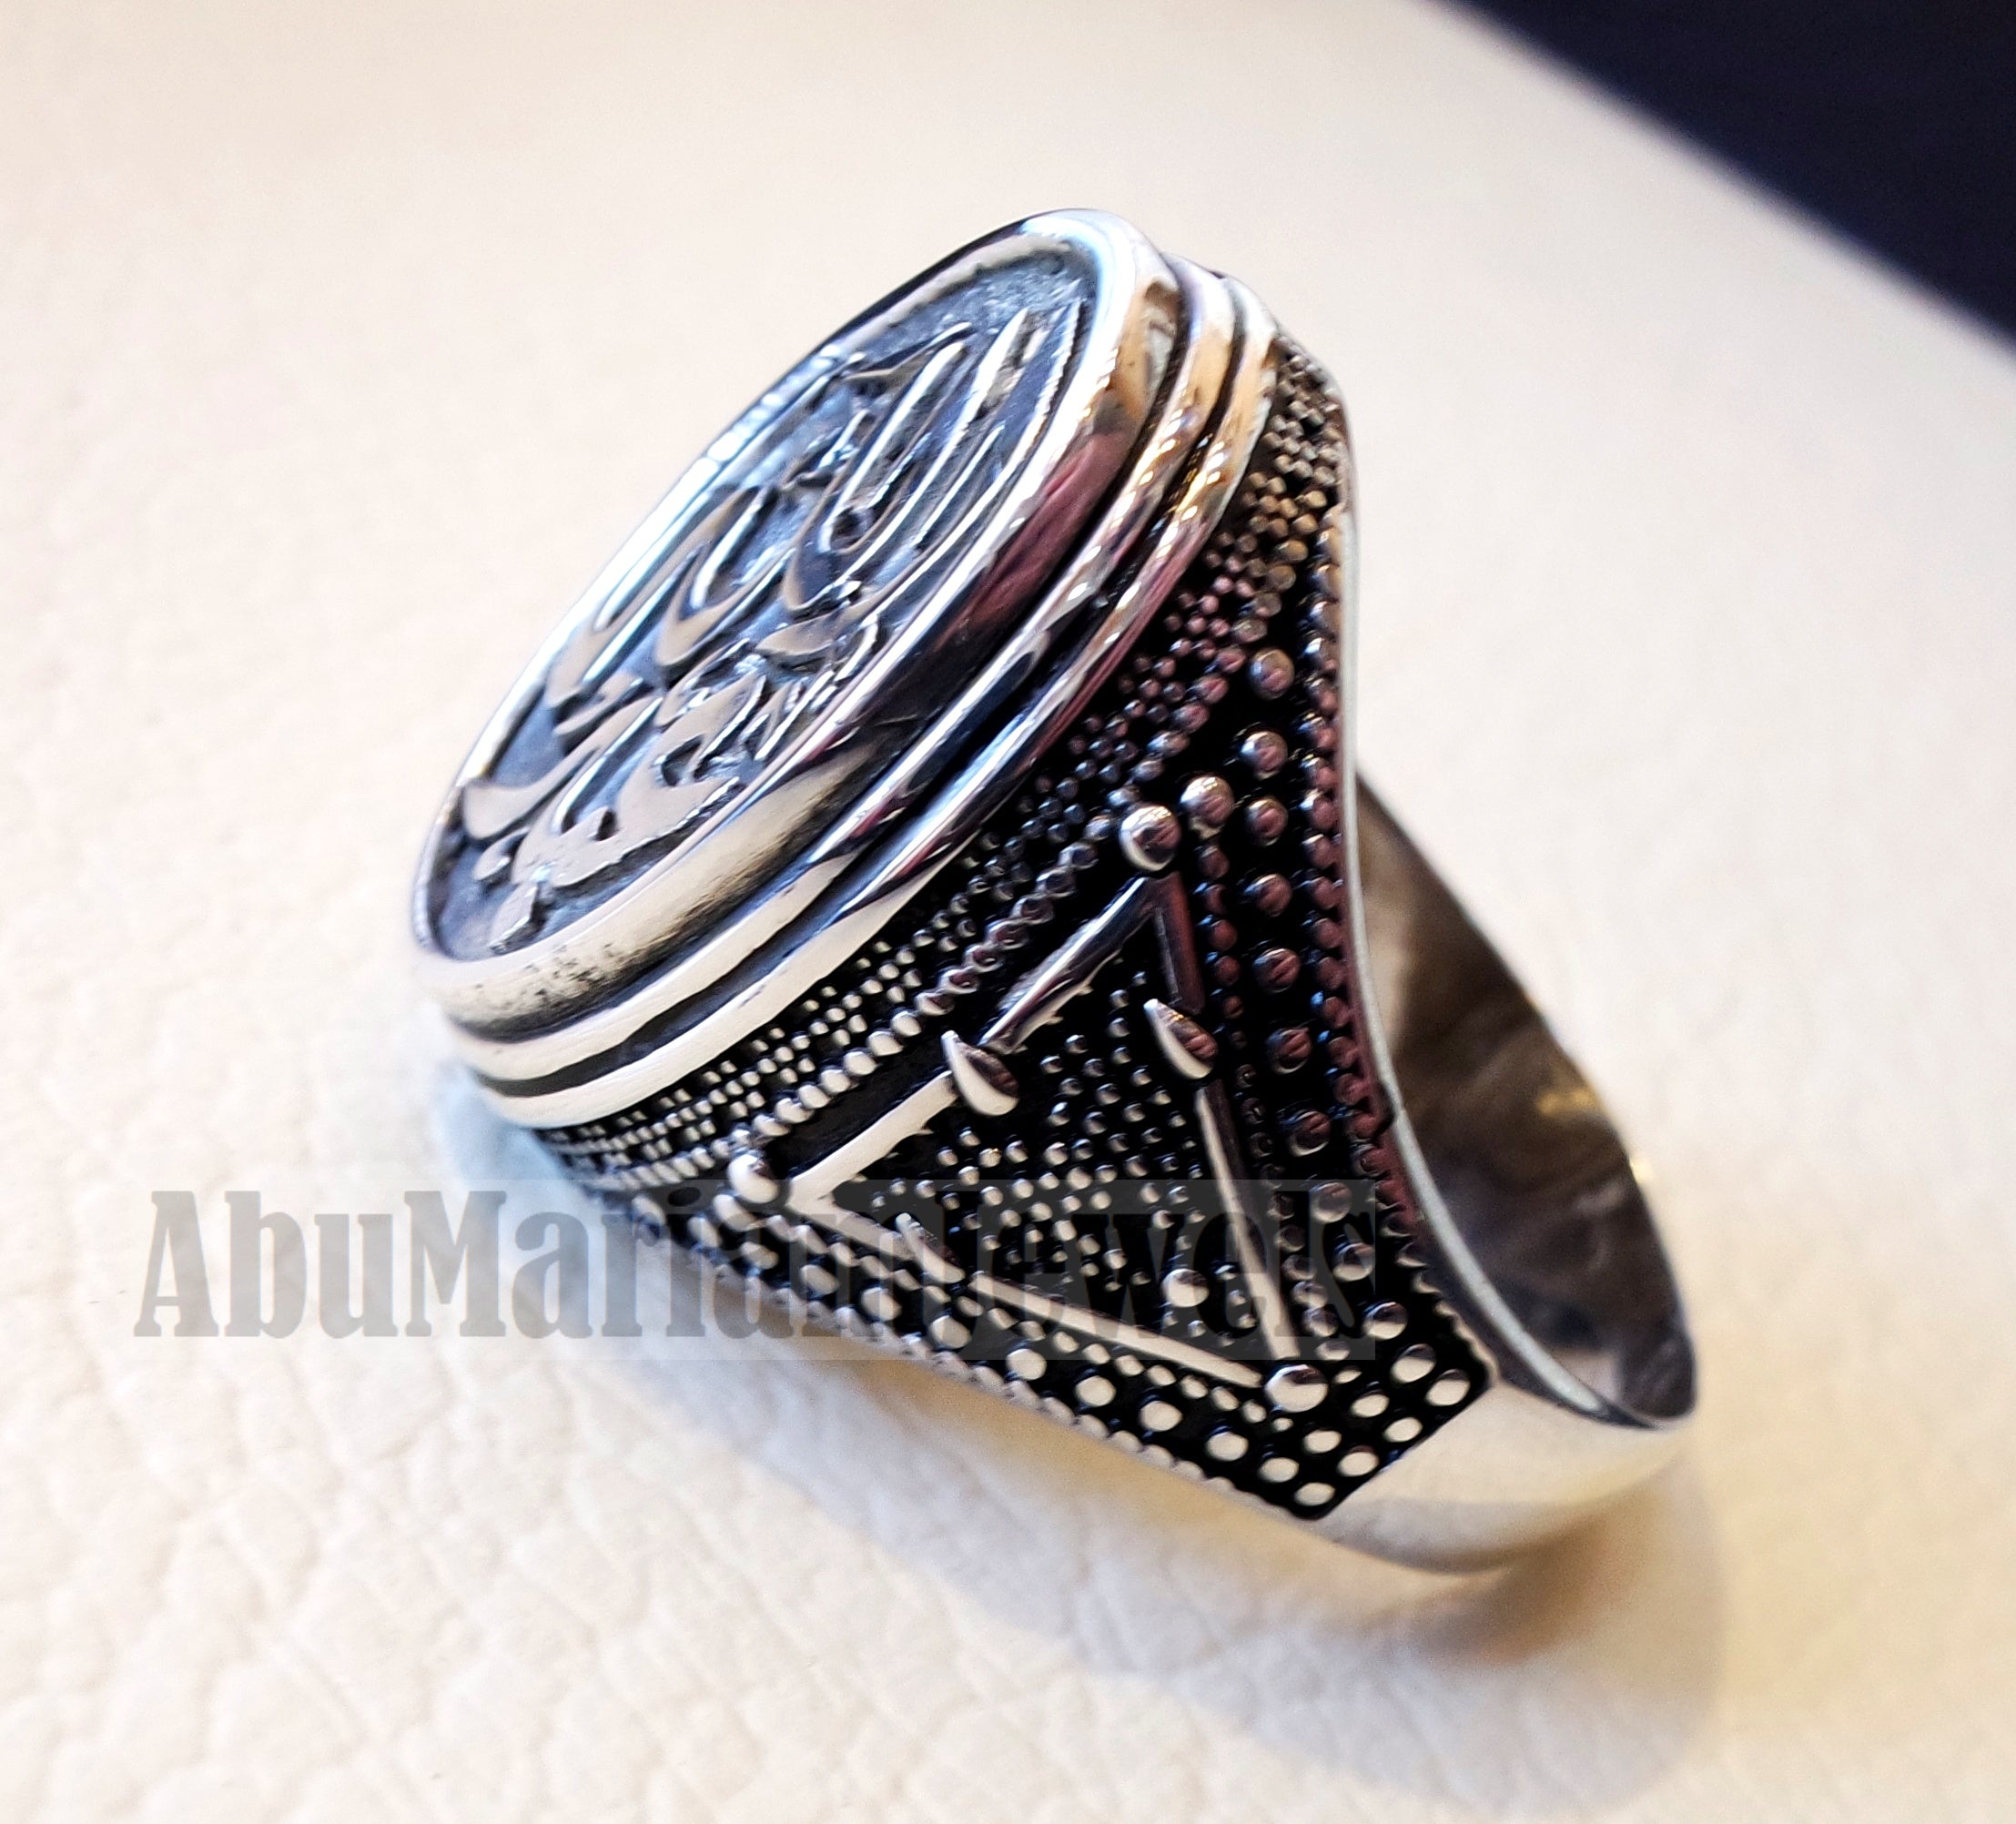 Customized Arabic calligraphy names ring personalized antique jewelry style sterling silver 925 any size TSS1001 خاتم اسم تفصيل